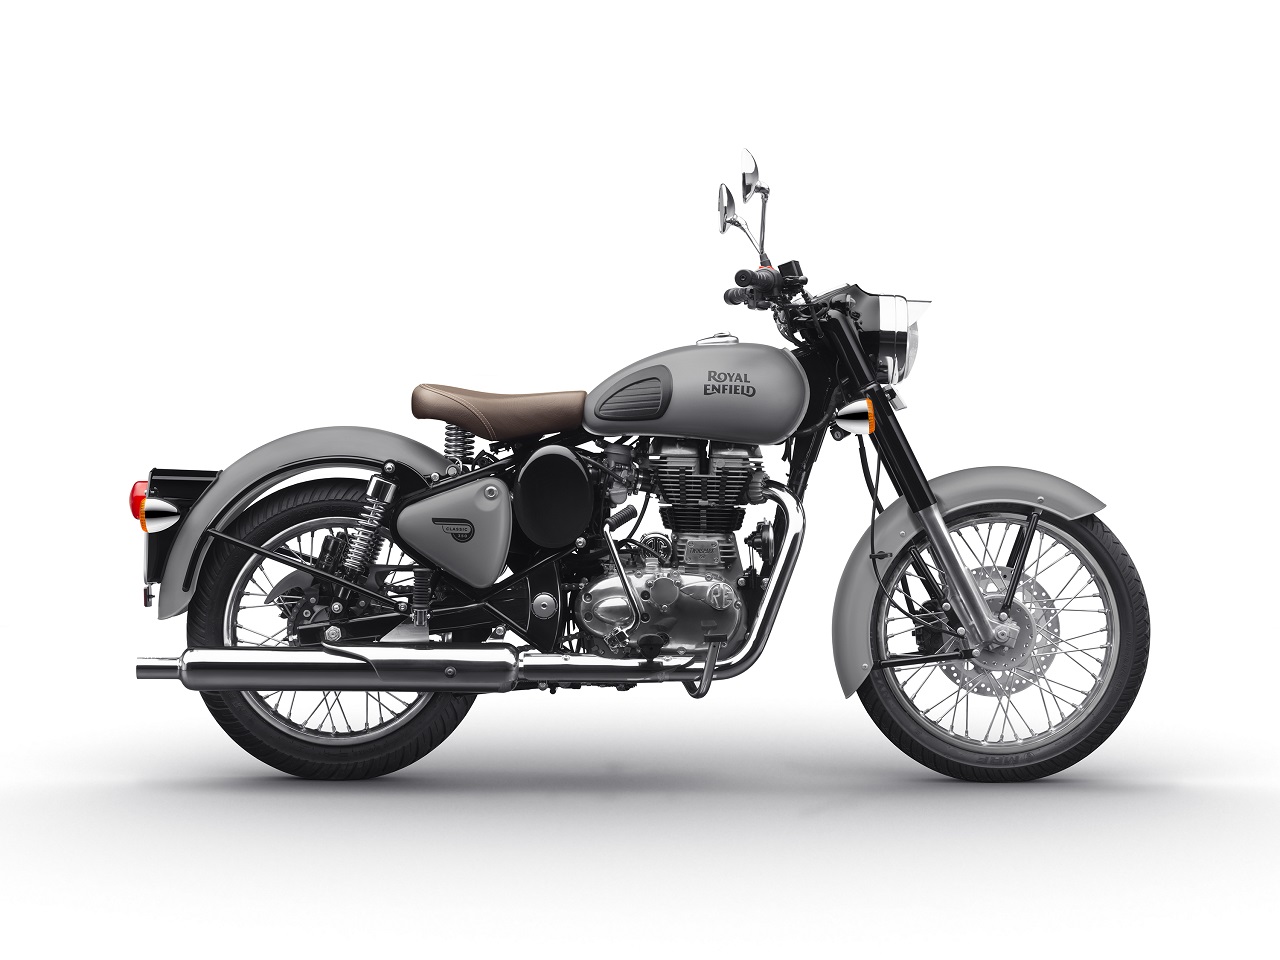 Royal Enfield Classic 650 twin cylinder motorcycle - IAB Rendering